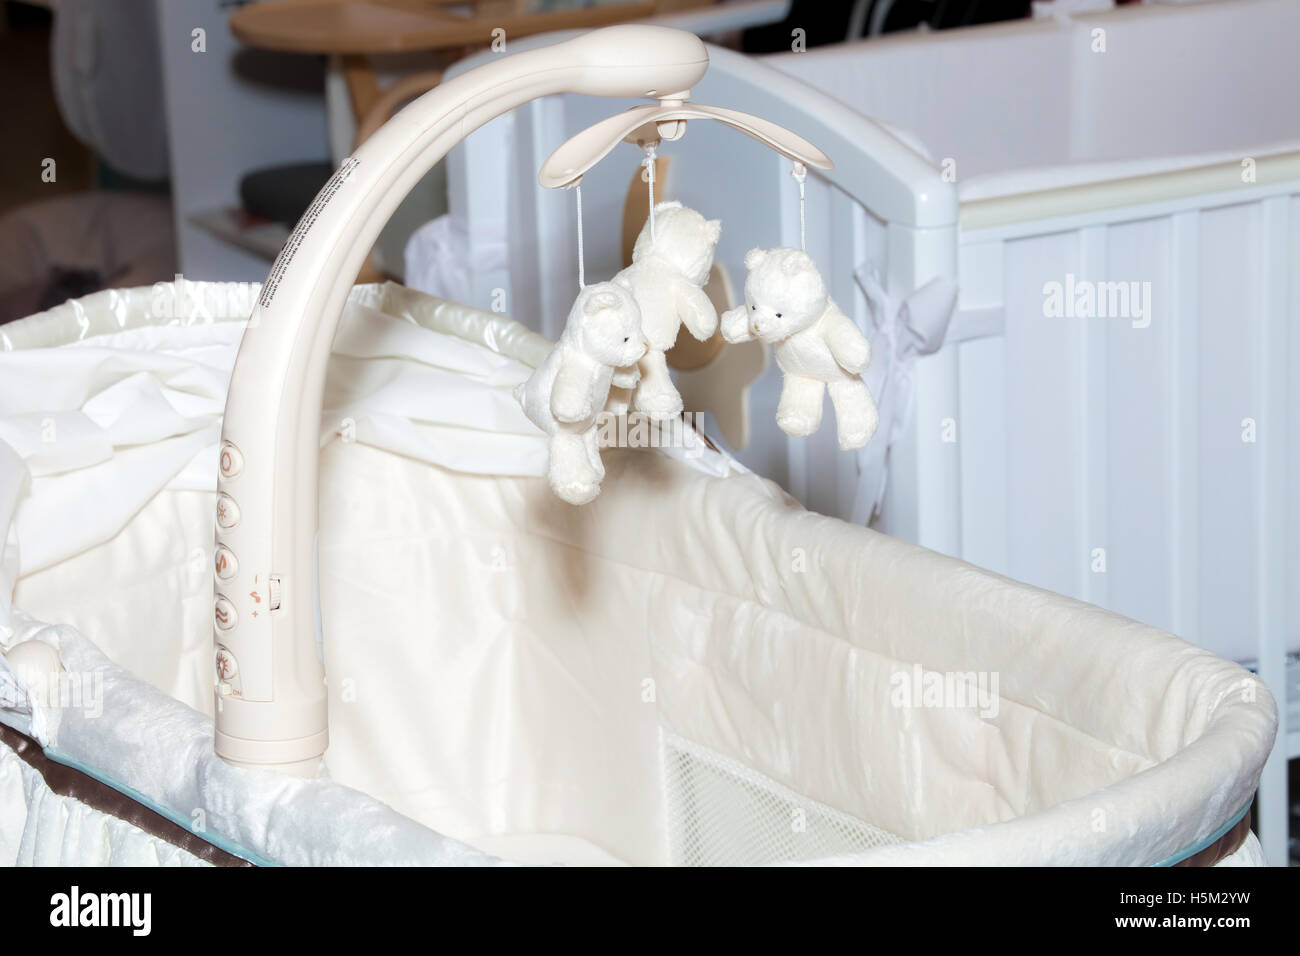 Baby mobile for crib Stock Photo